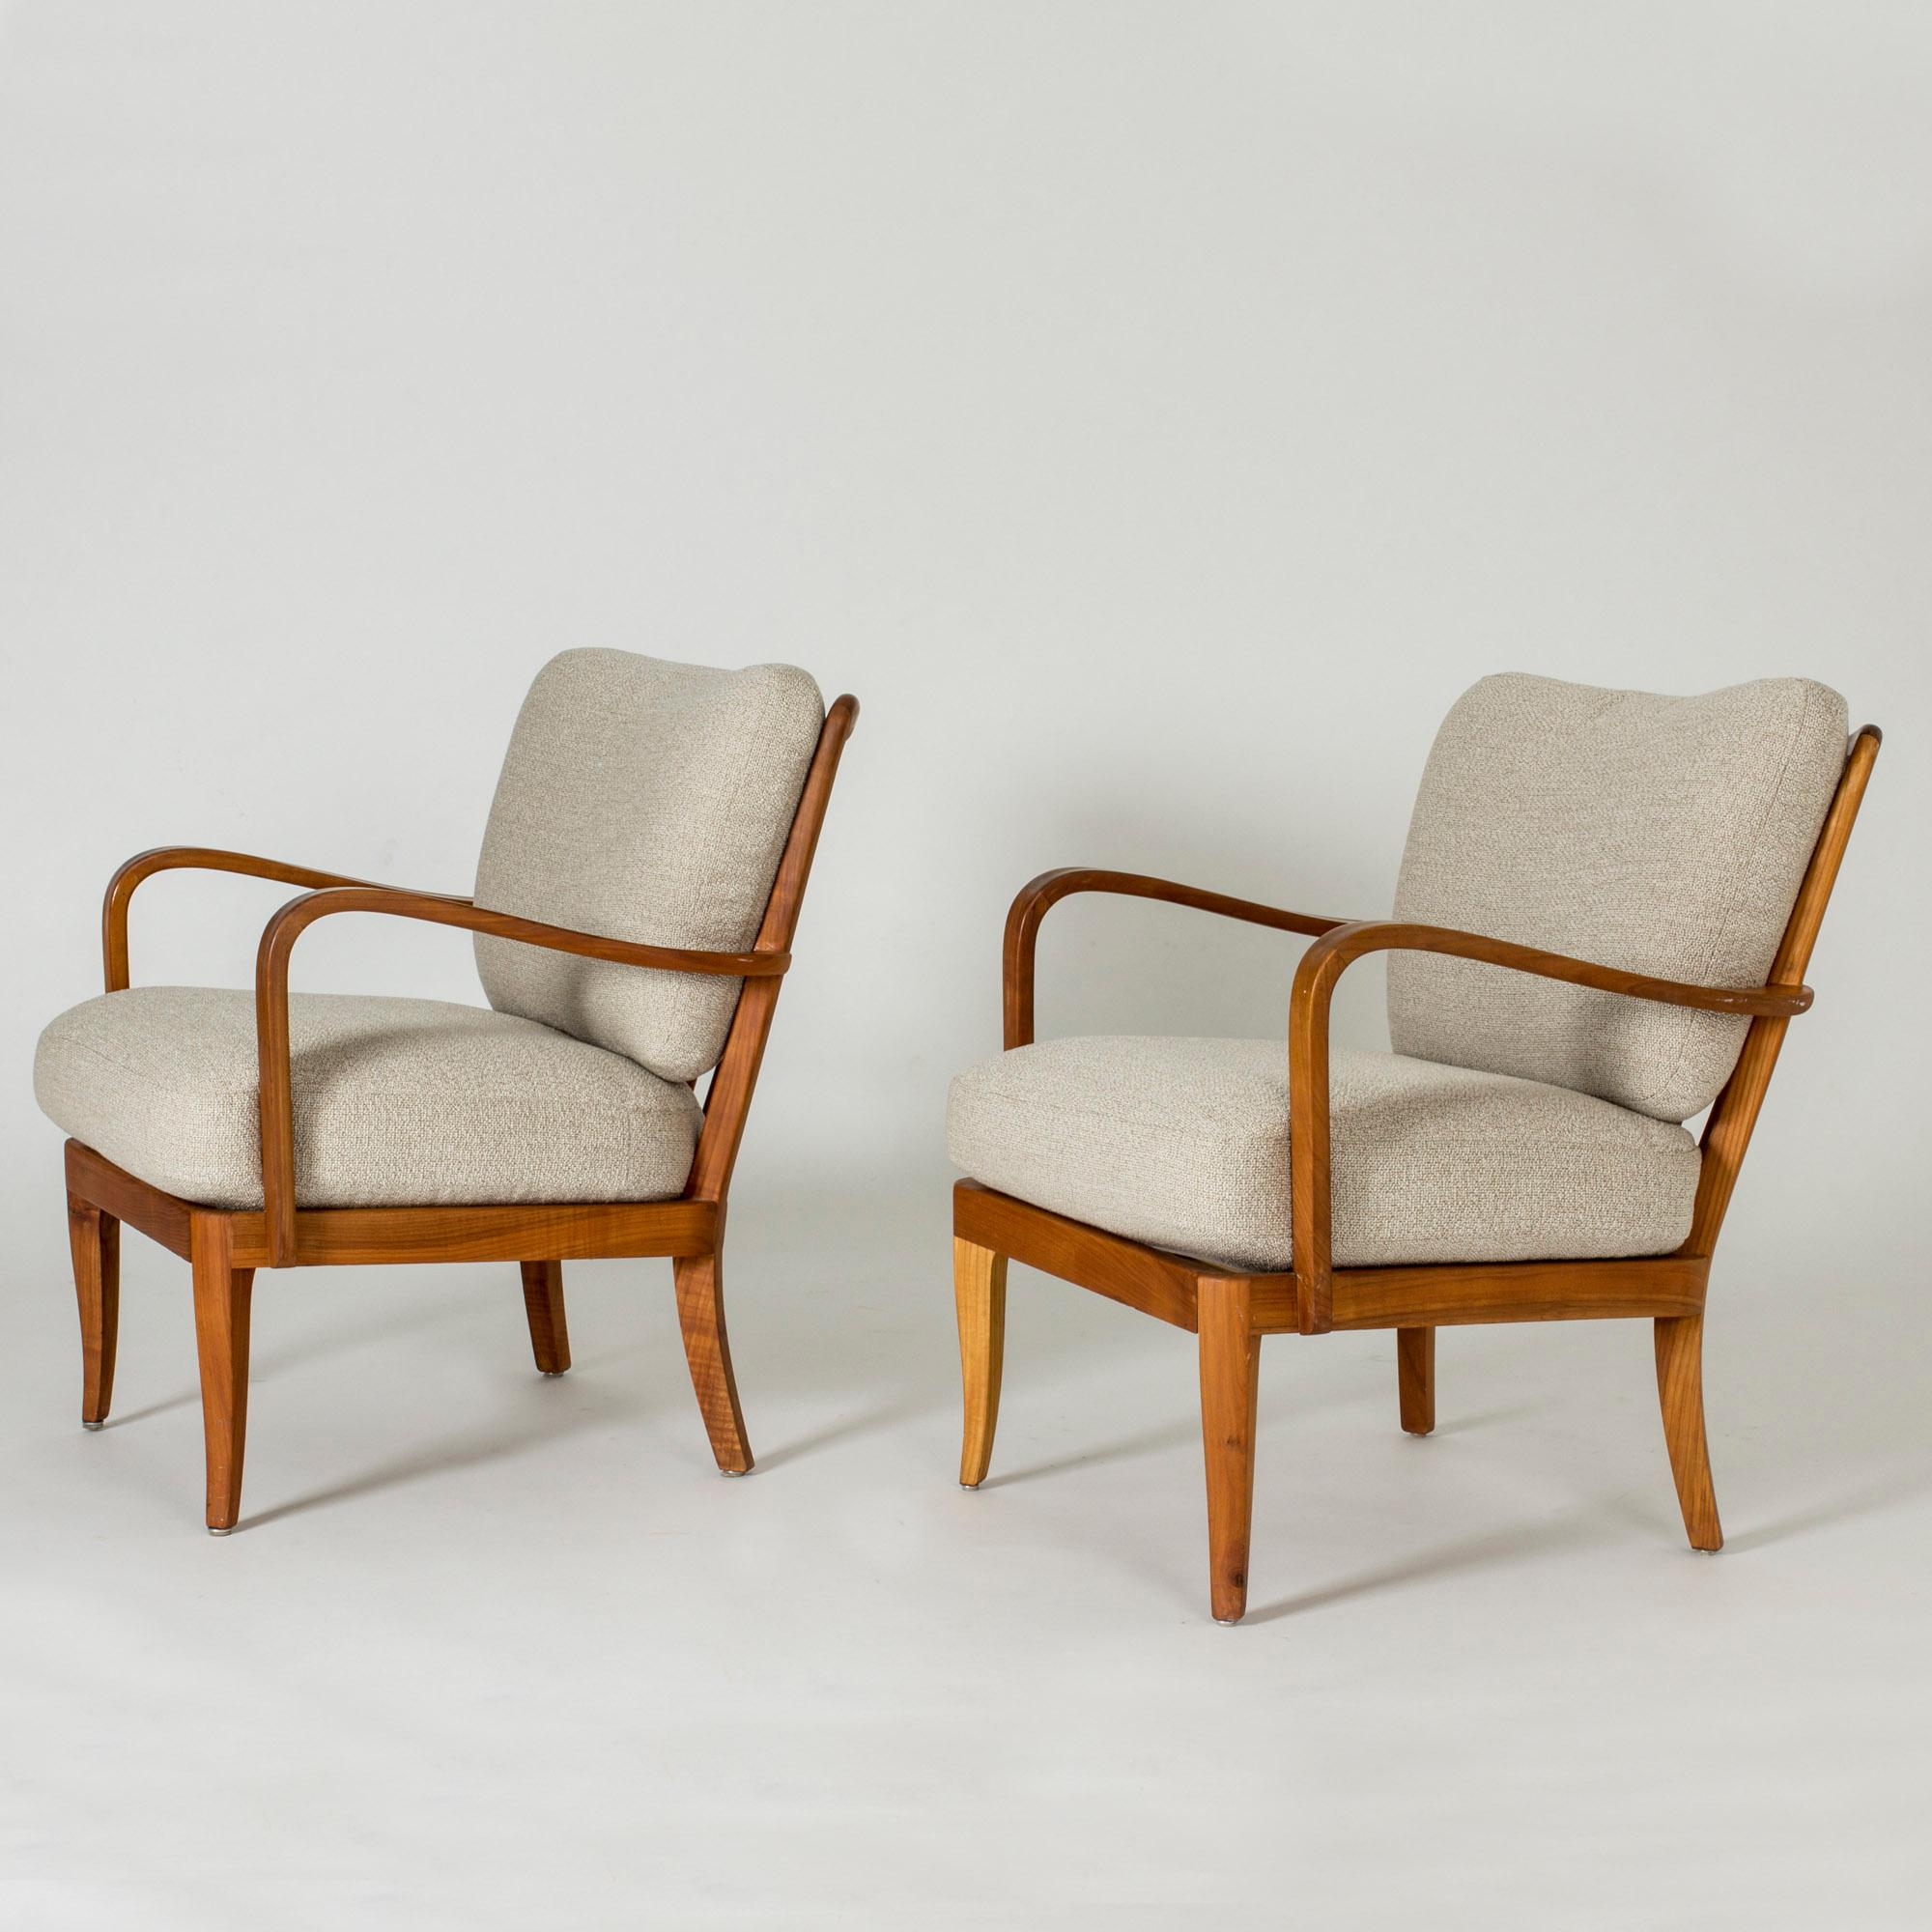 Pair of beautiful lounge chairs by G. A. Berg, made from elmwood. Curved, open lines, lovely broad, ribbed backs.